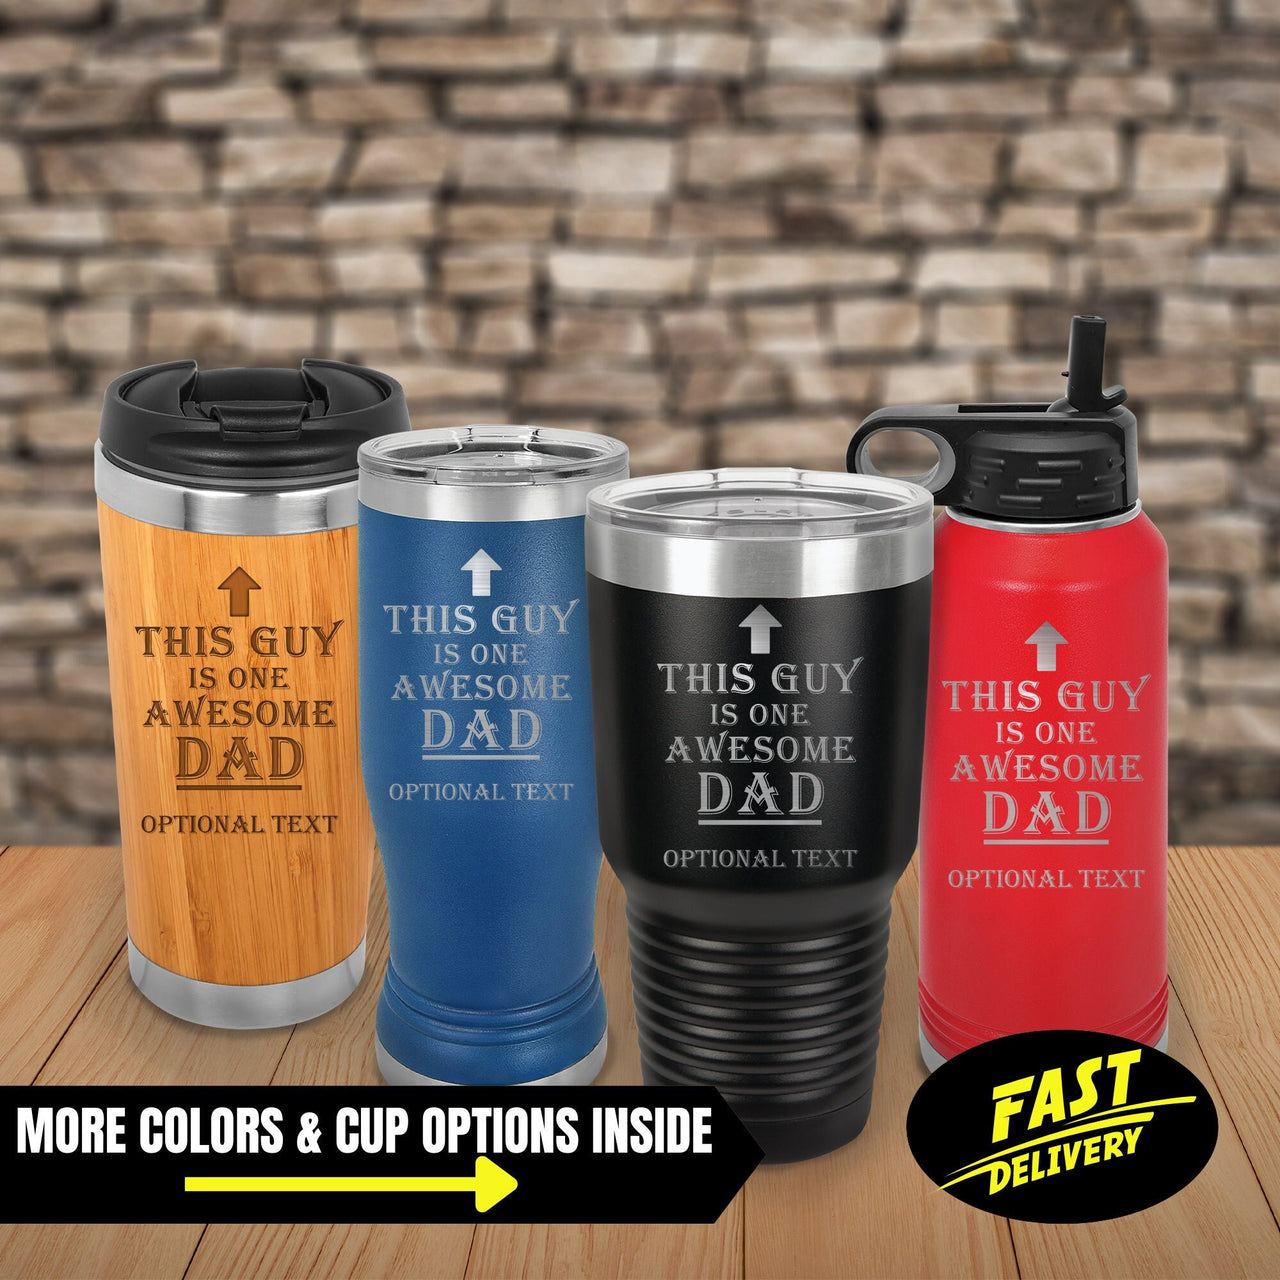 This Guy Is One Awesome Dad Tumbler, Personalized Dad Tumbler, New Dad Life Tumbler, Hot/Cold Coffee Tumbler Gift for Fathers, Father's Day